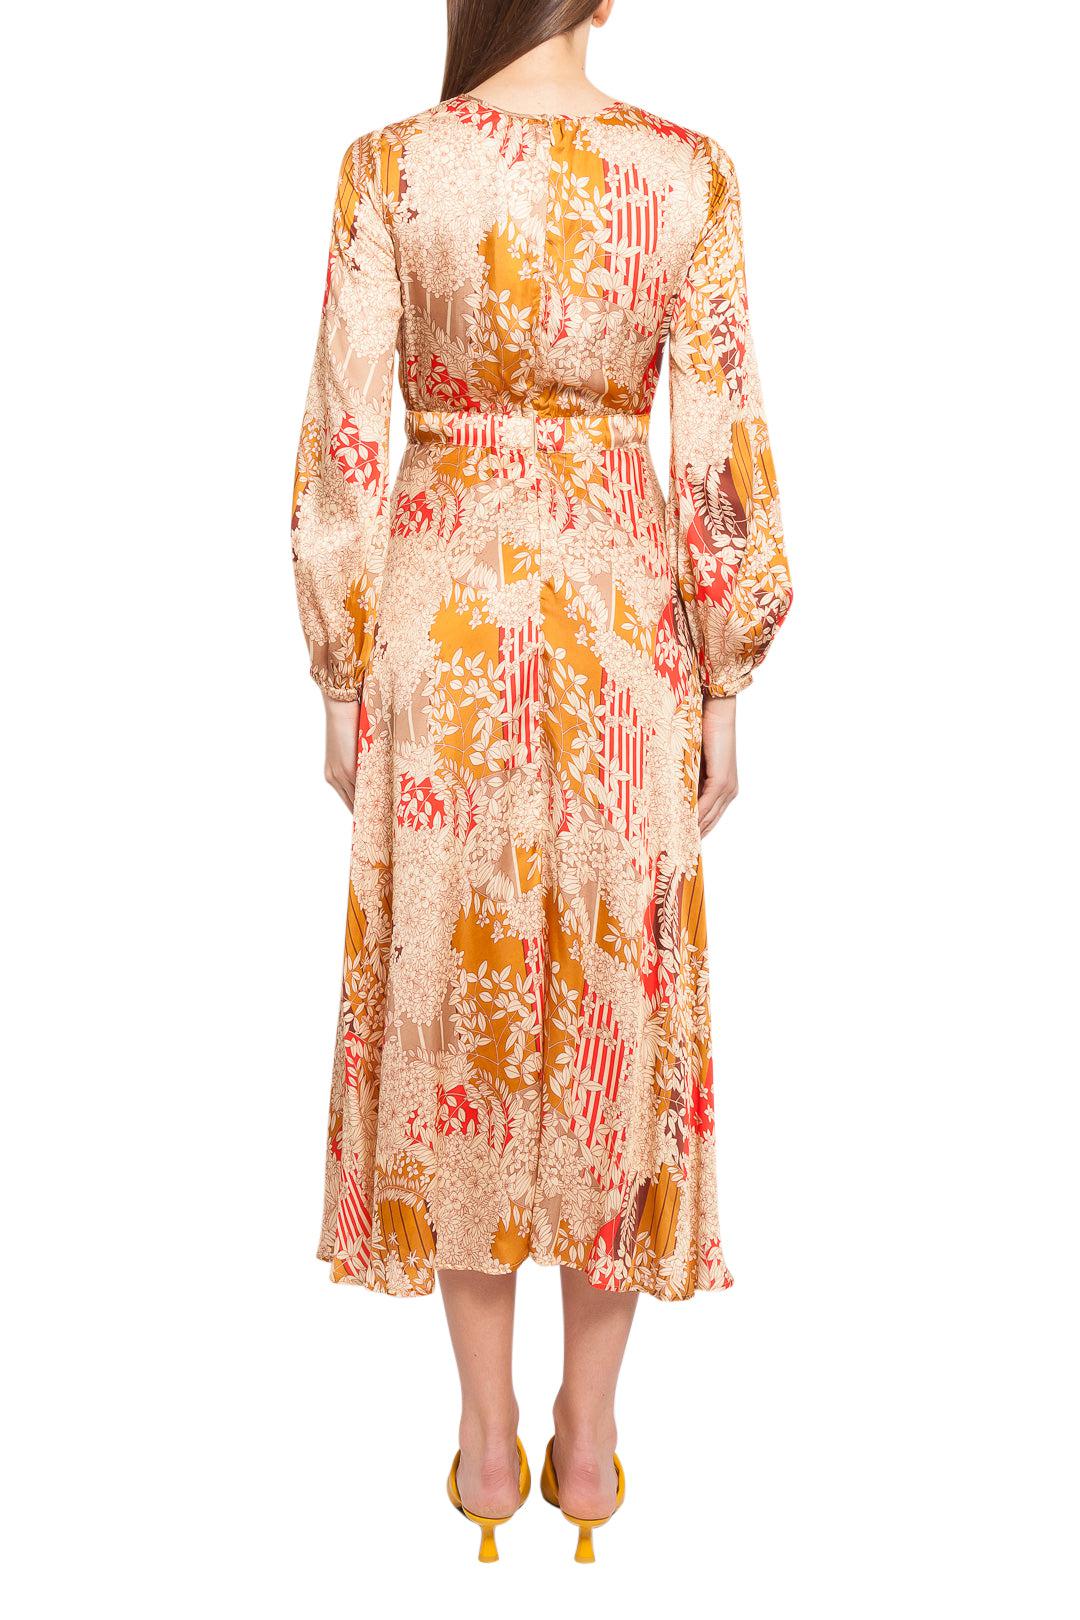 By Timo-Floral pattern flared long dress-dgallerystore